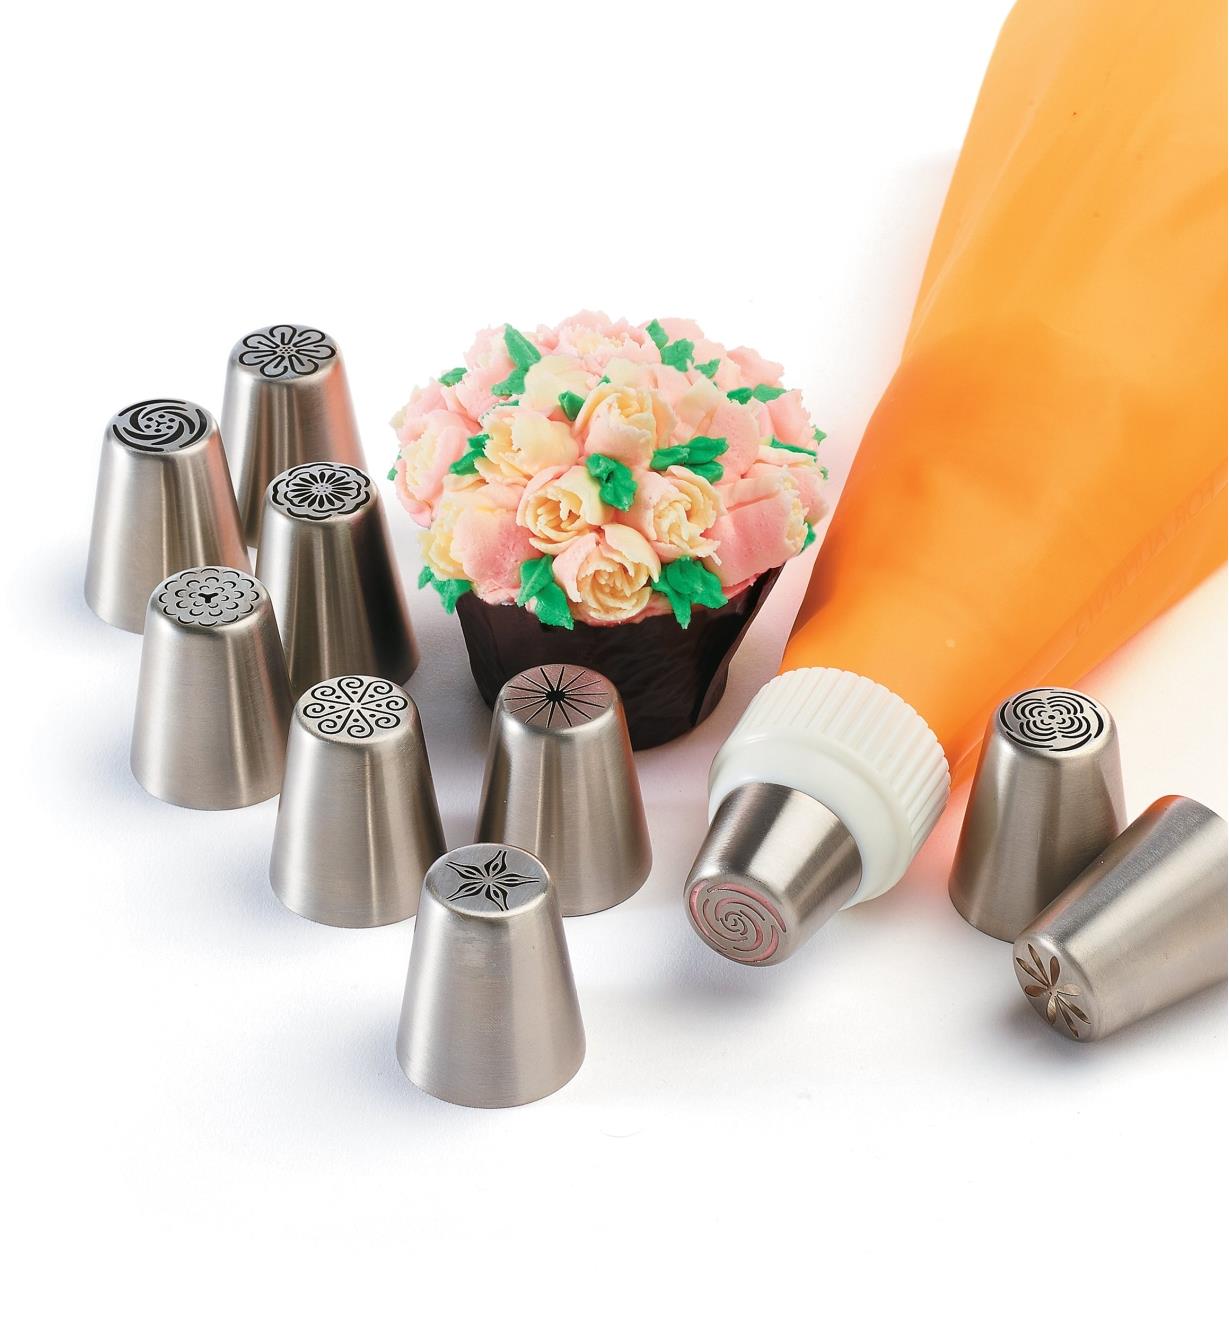 Set of 10 large piping tips sitting next to a decorated cupcake, with one tip attached to a piping bag, sold separately